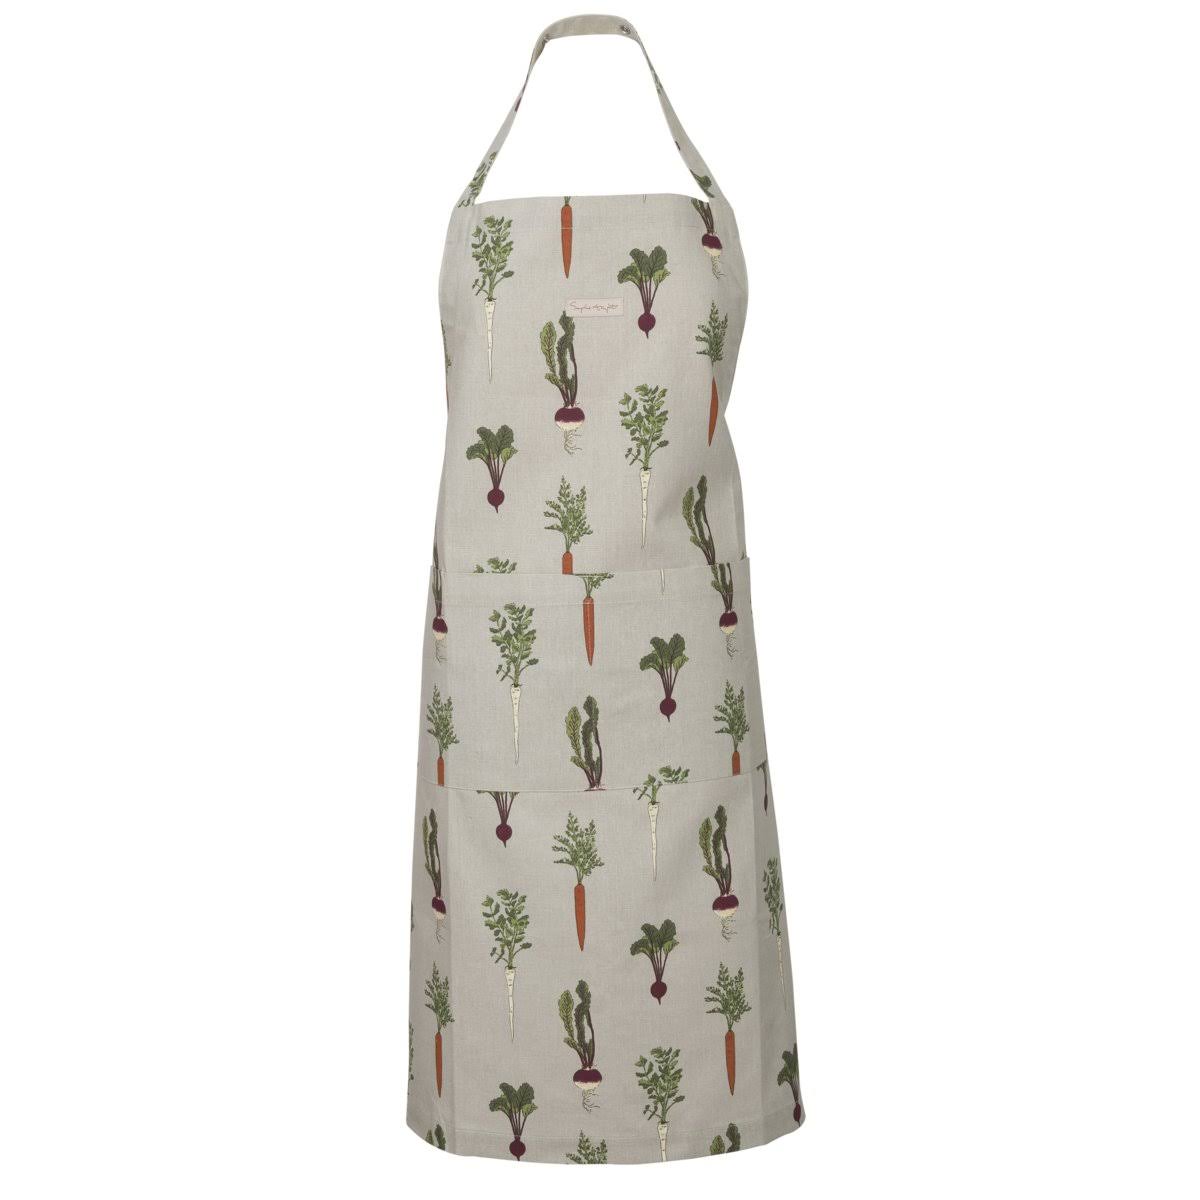 Home Grown Adult Apron by Sophie Allport